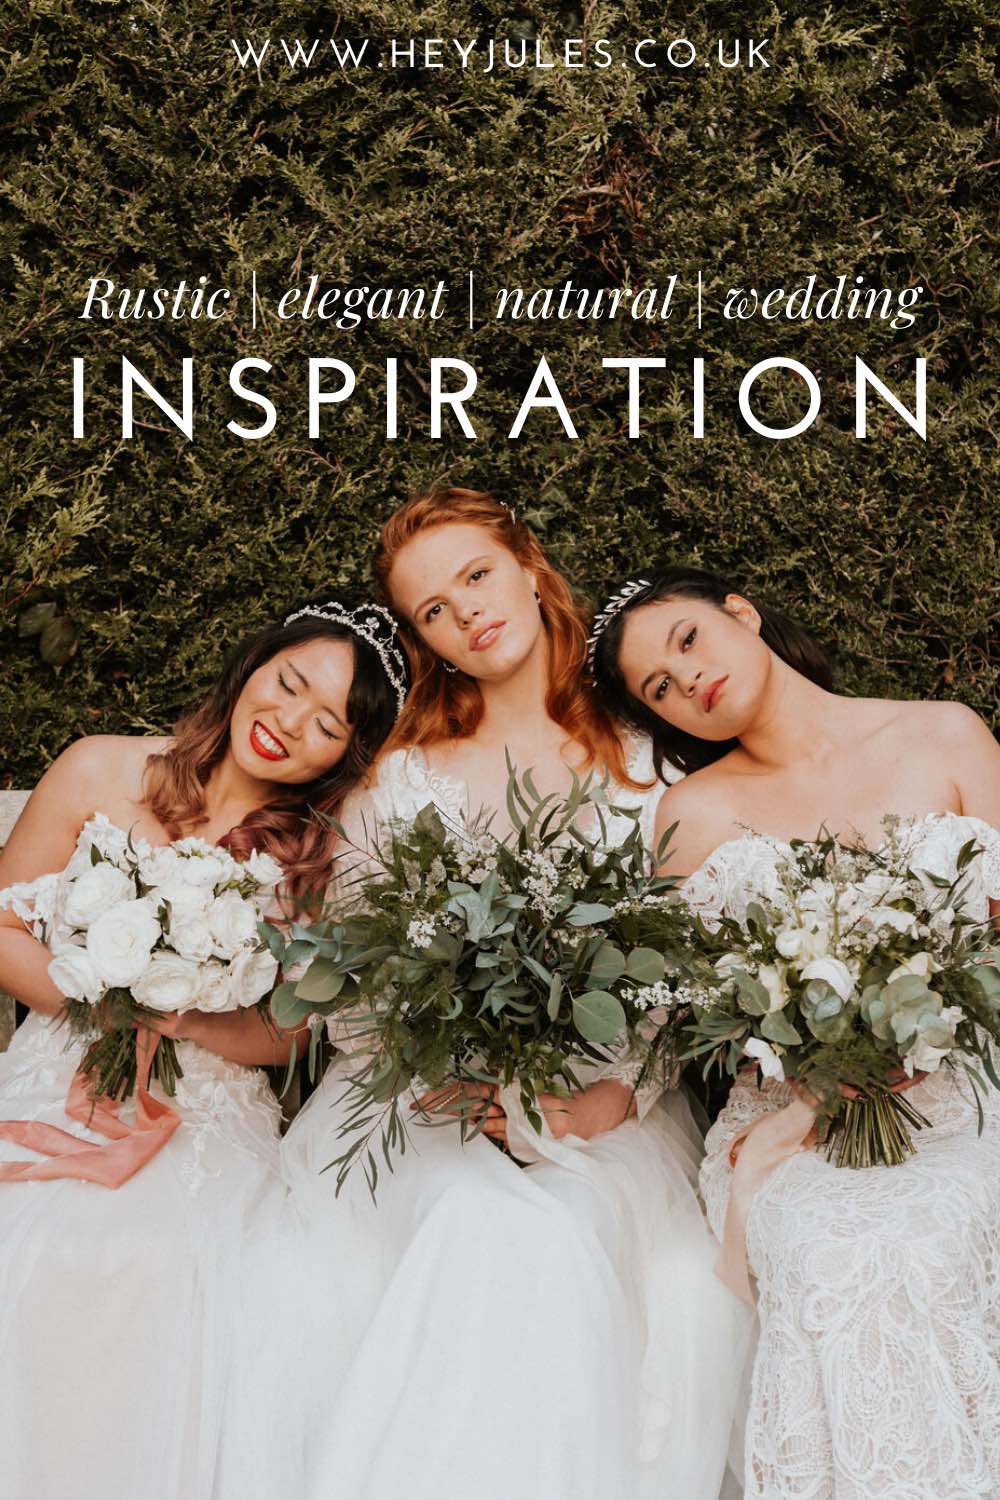 3 brides with leafy eucalyptus bouquets with wedding dresses and bridal headbands